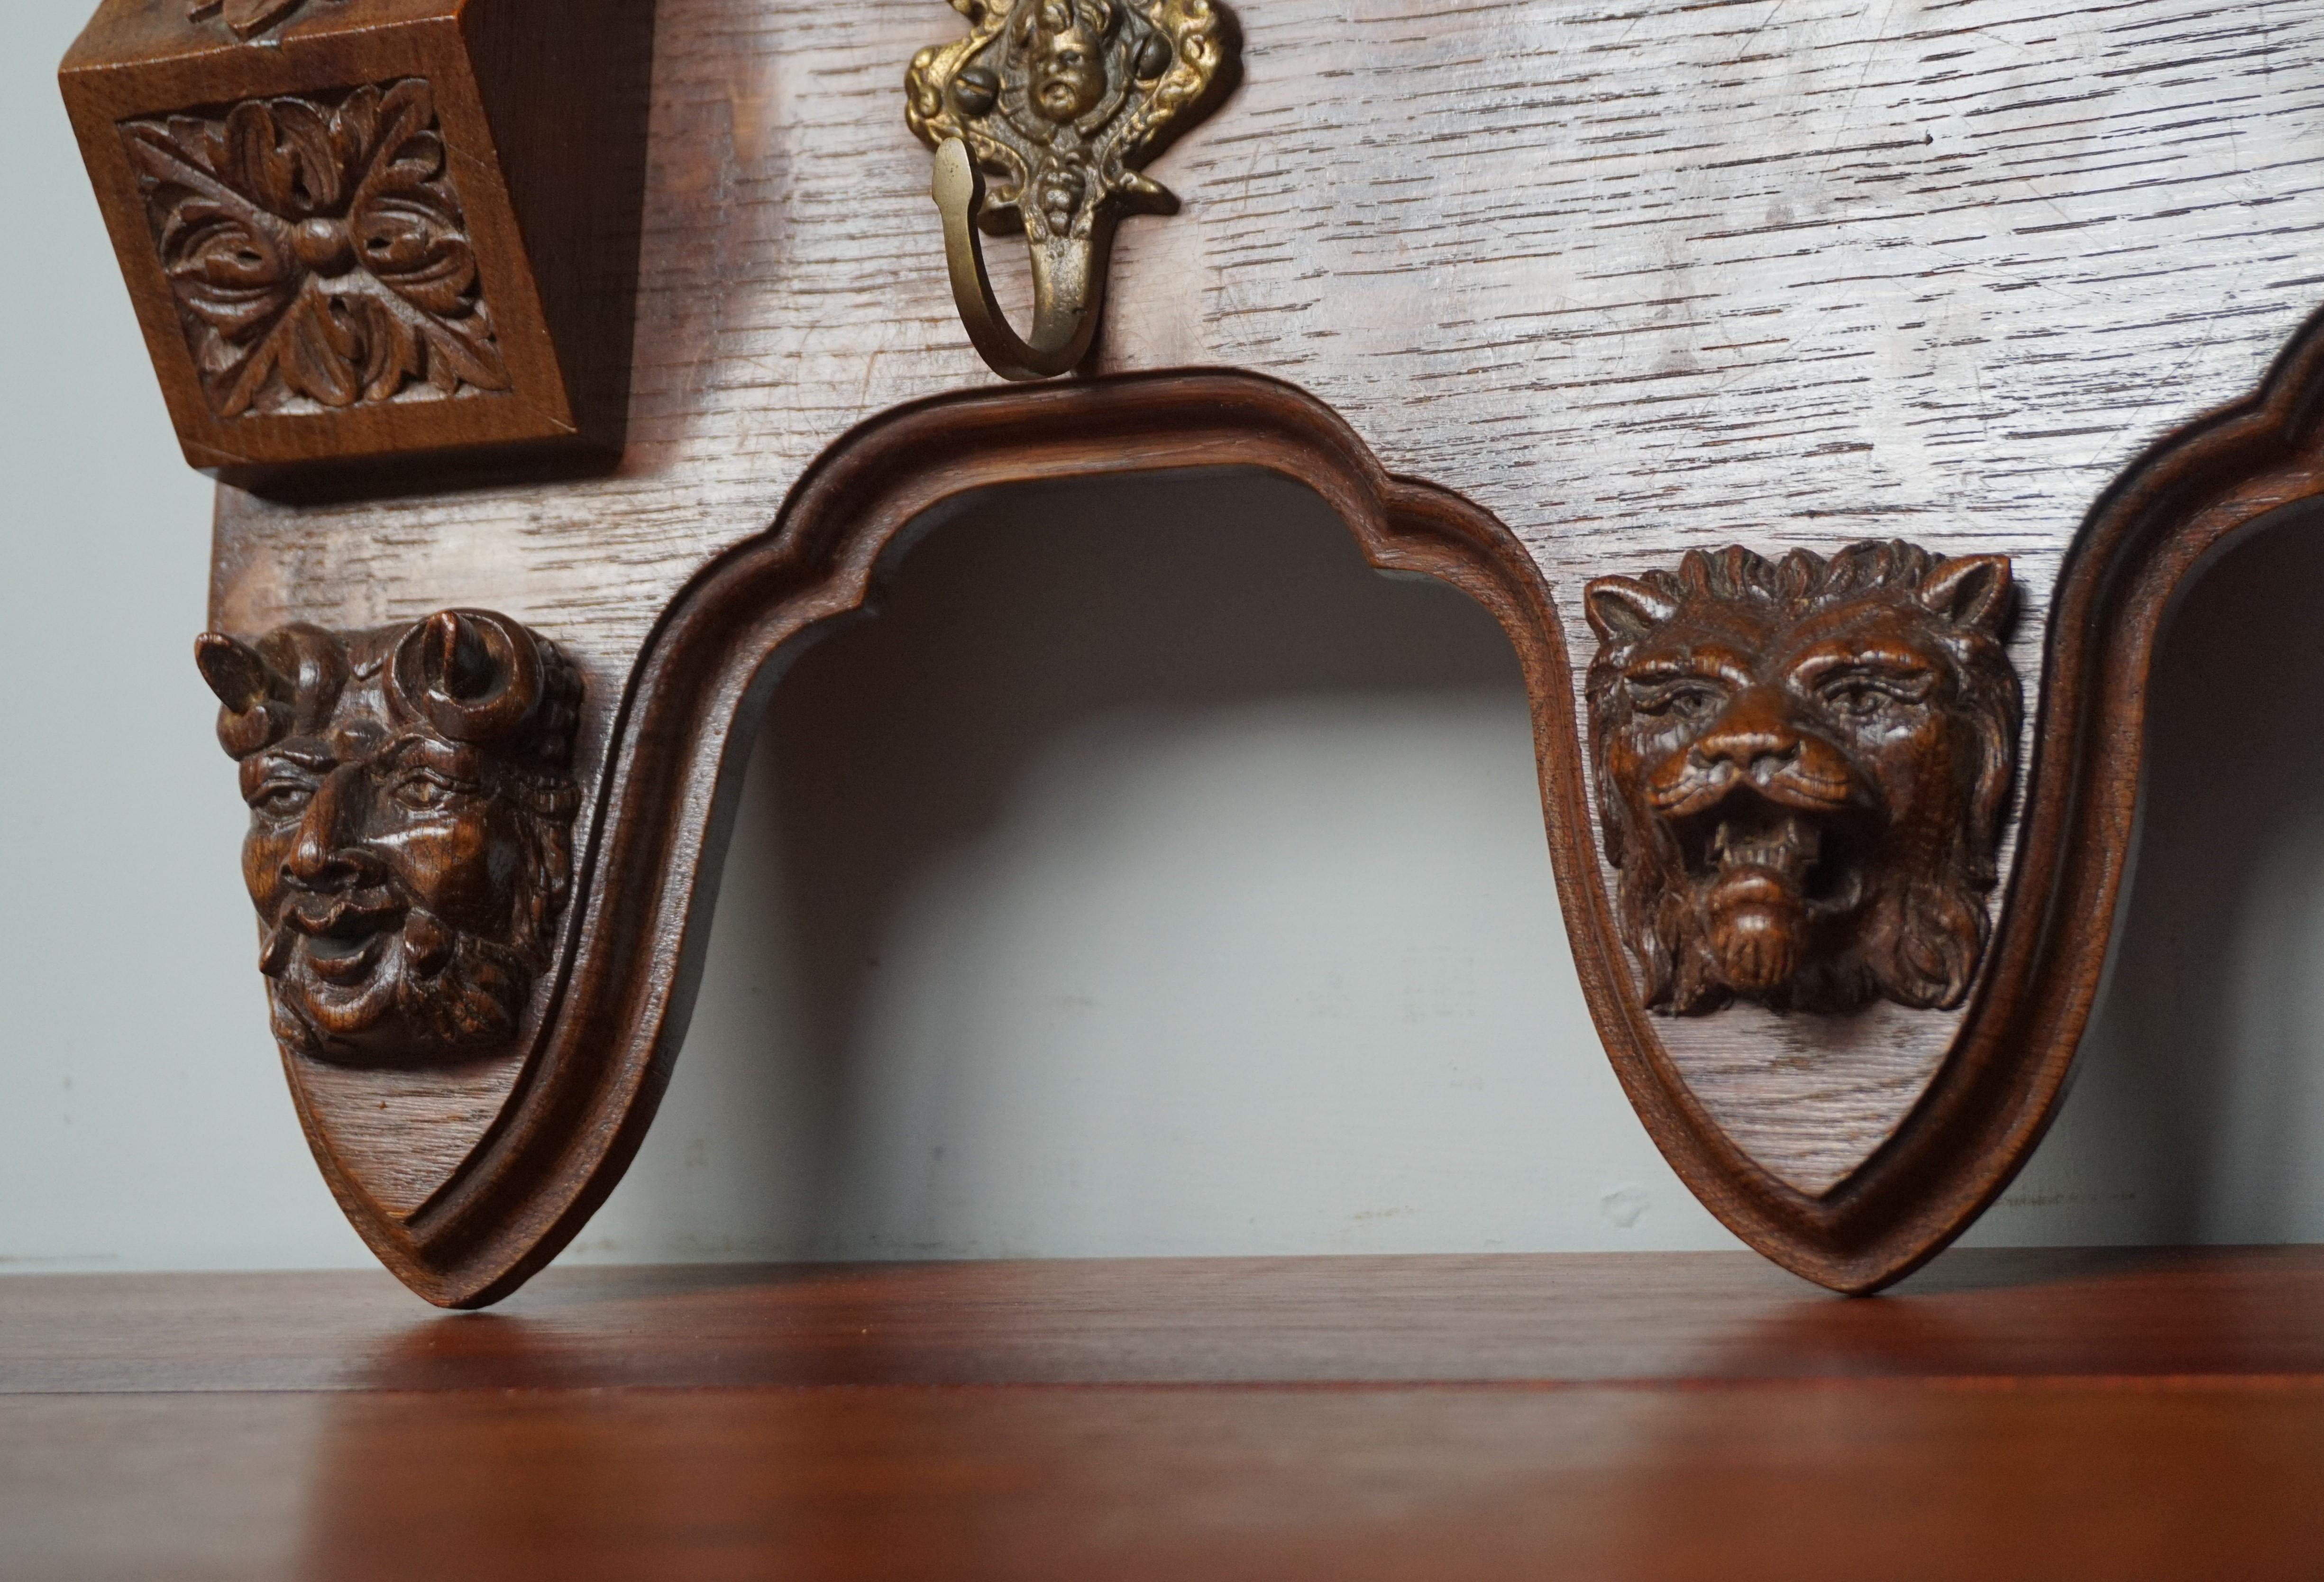 Dutch Very Large Hand Carved Oak Wall Coat Rack with Lion & Grotesque Mask Sculptures